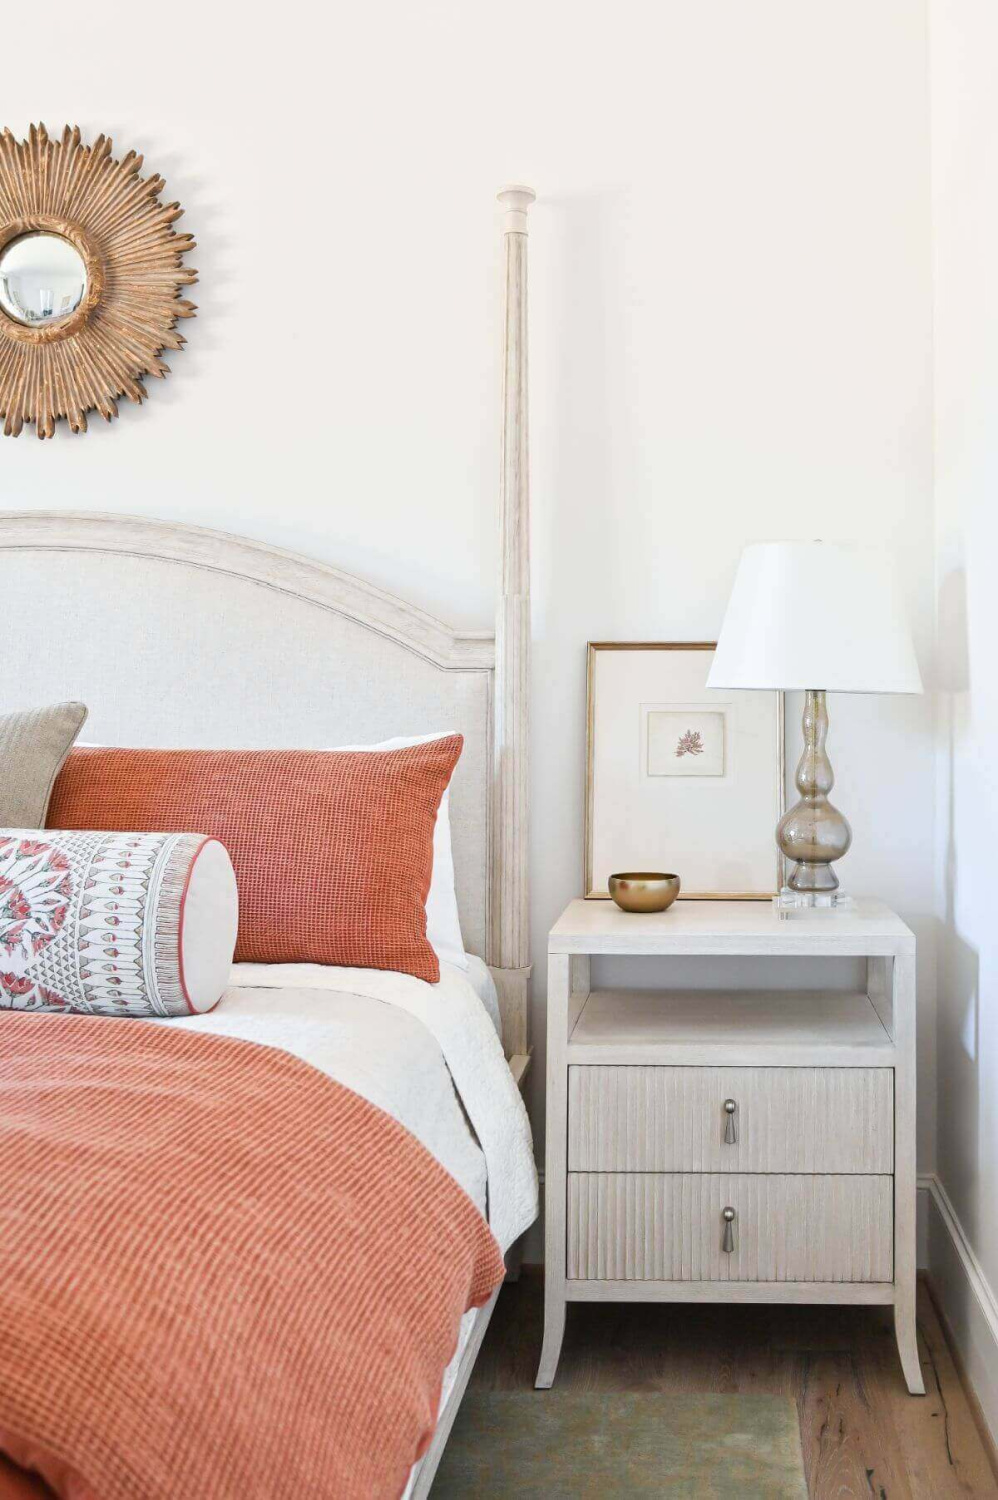 Beautiful modern French country bedroom with orange accents and pale furniture - Morningstar Builders. #frenchbedroom #modernfrench #bedroomdecor